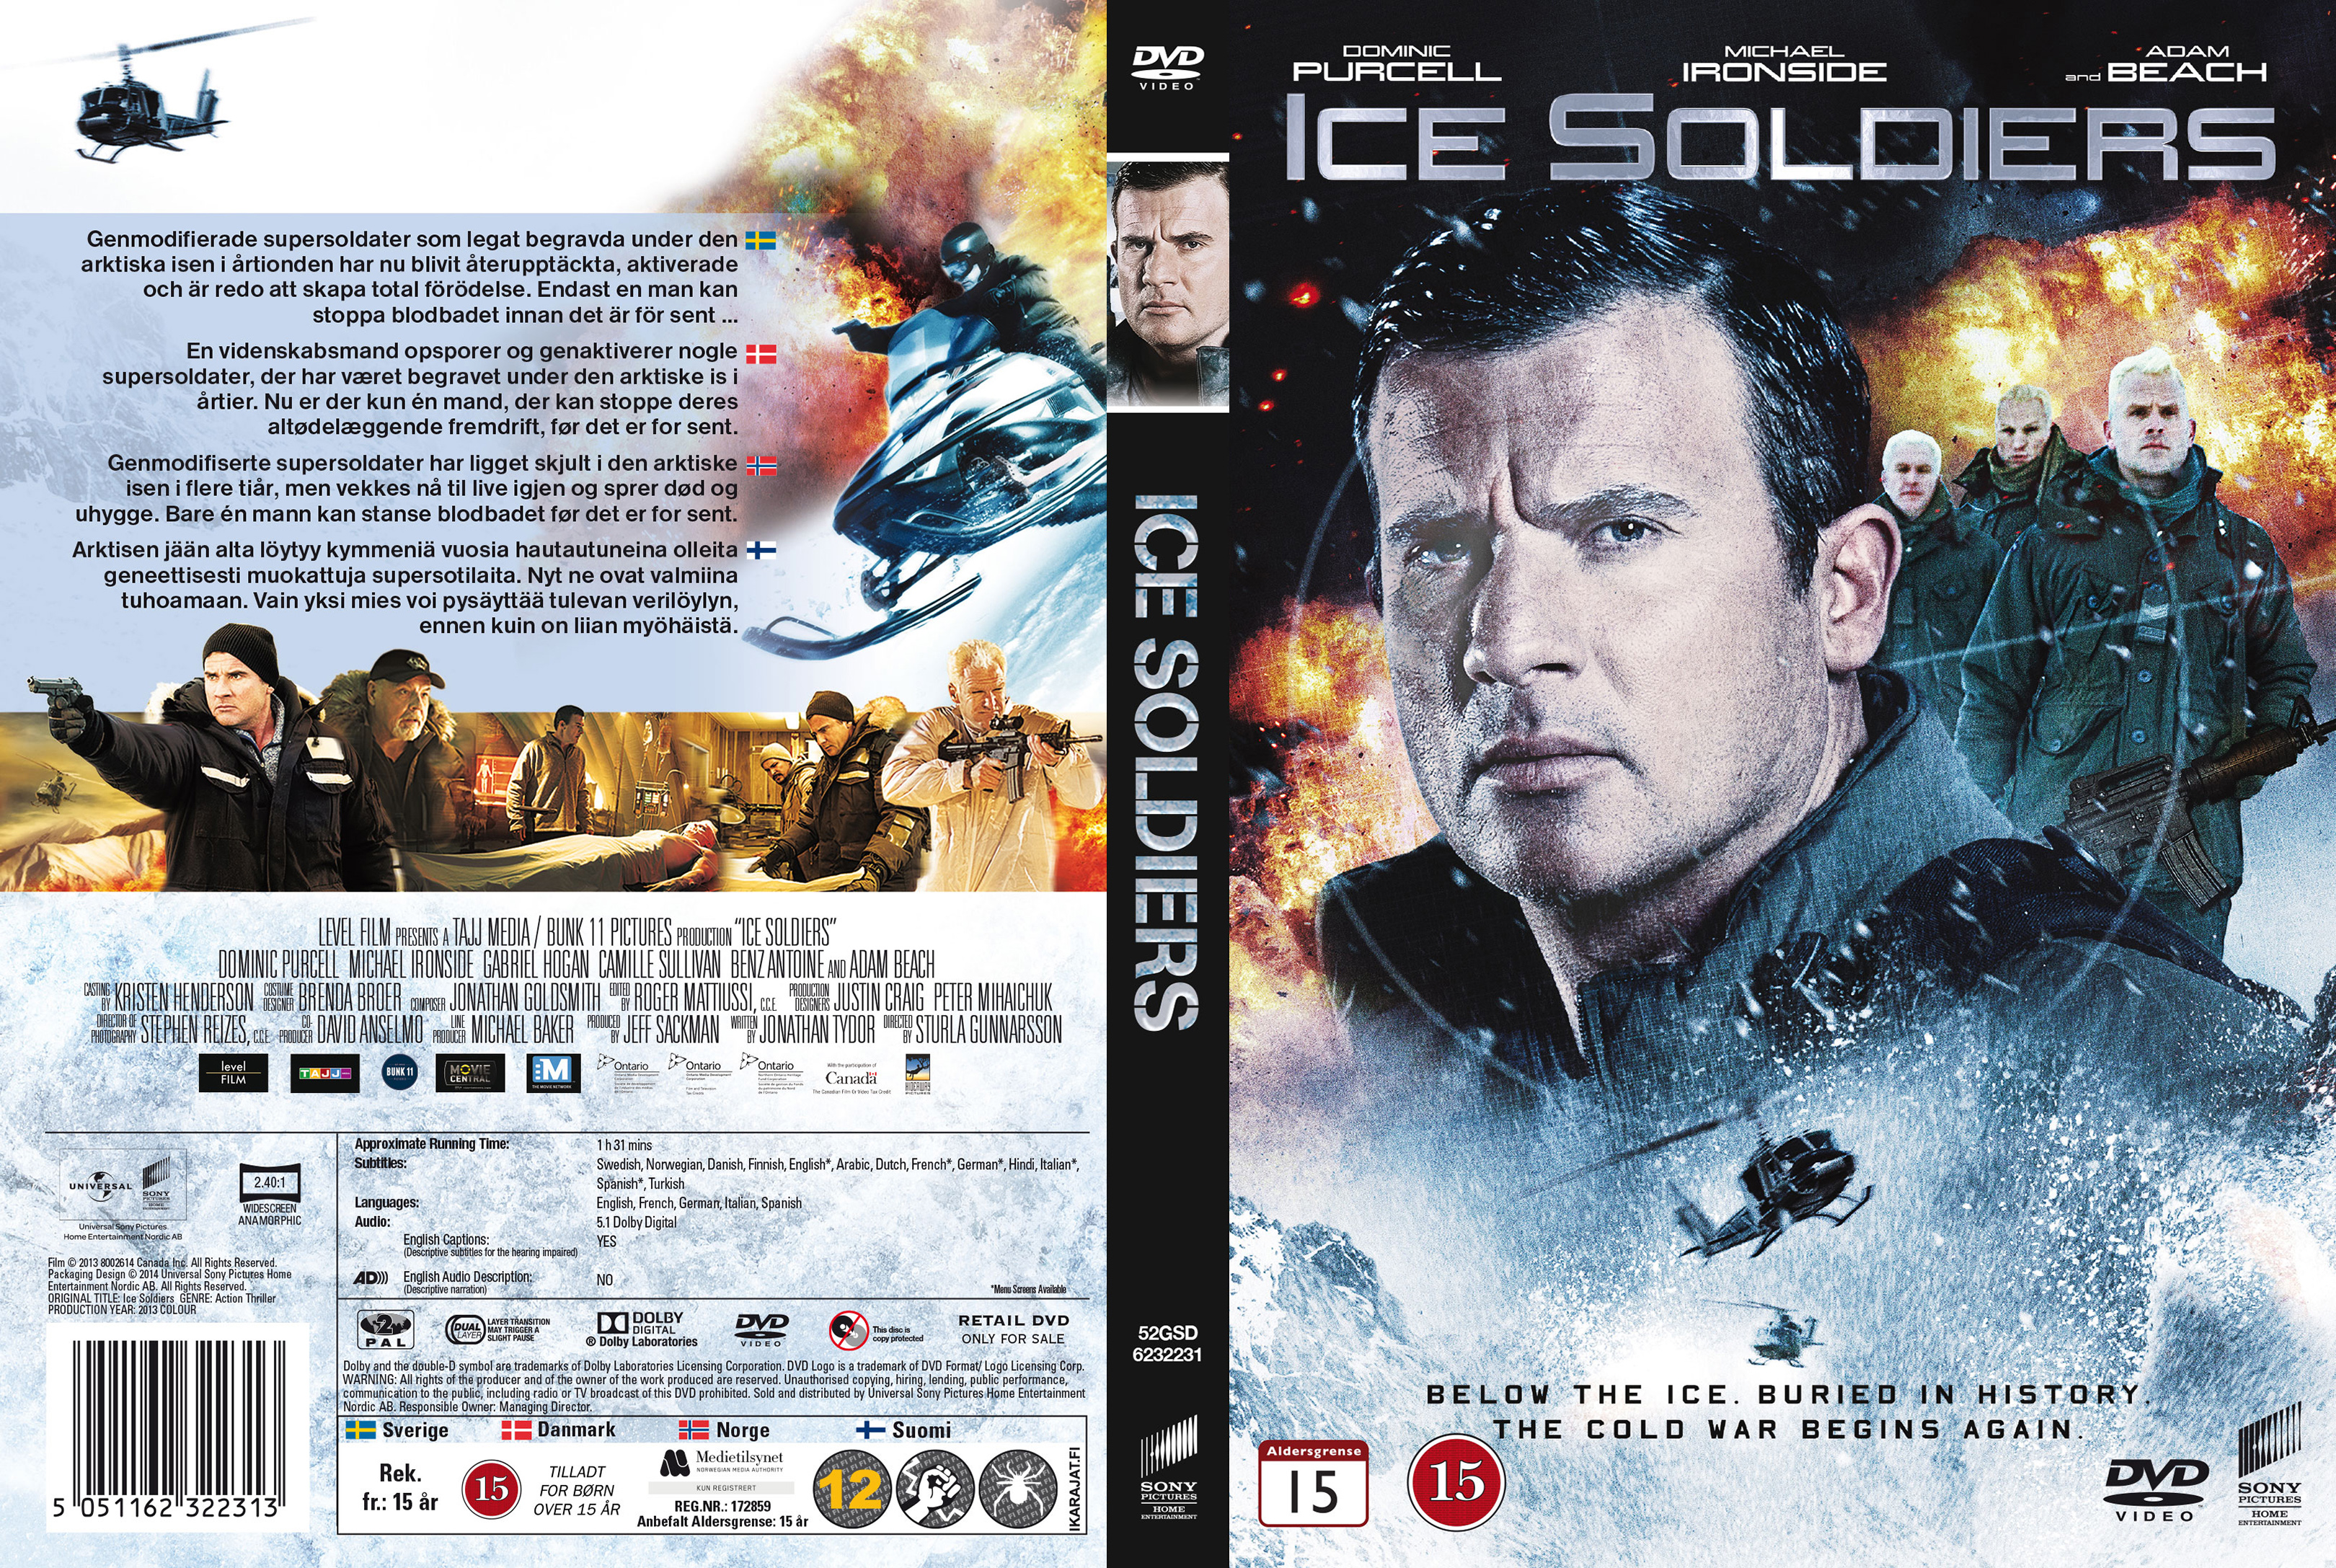 Jaquette DVD Ice soldiers custom